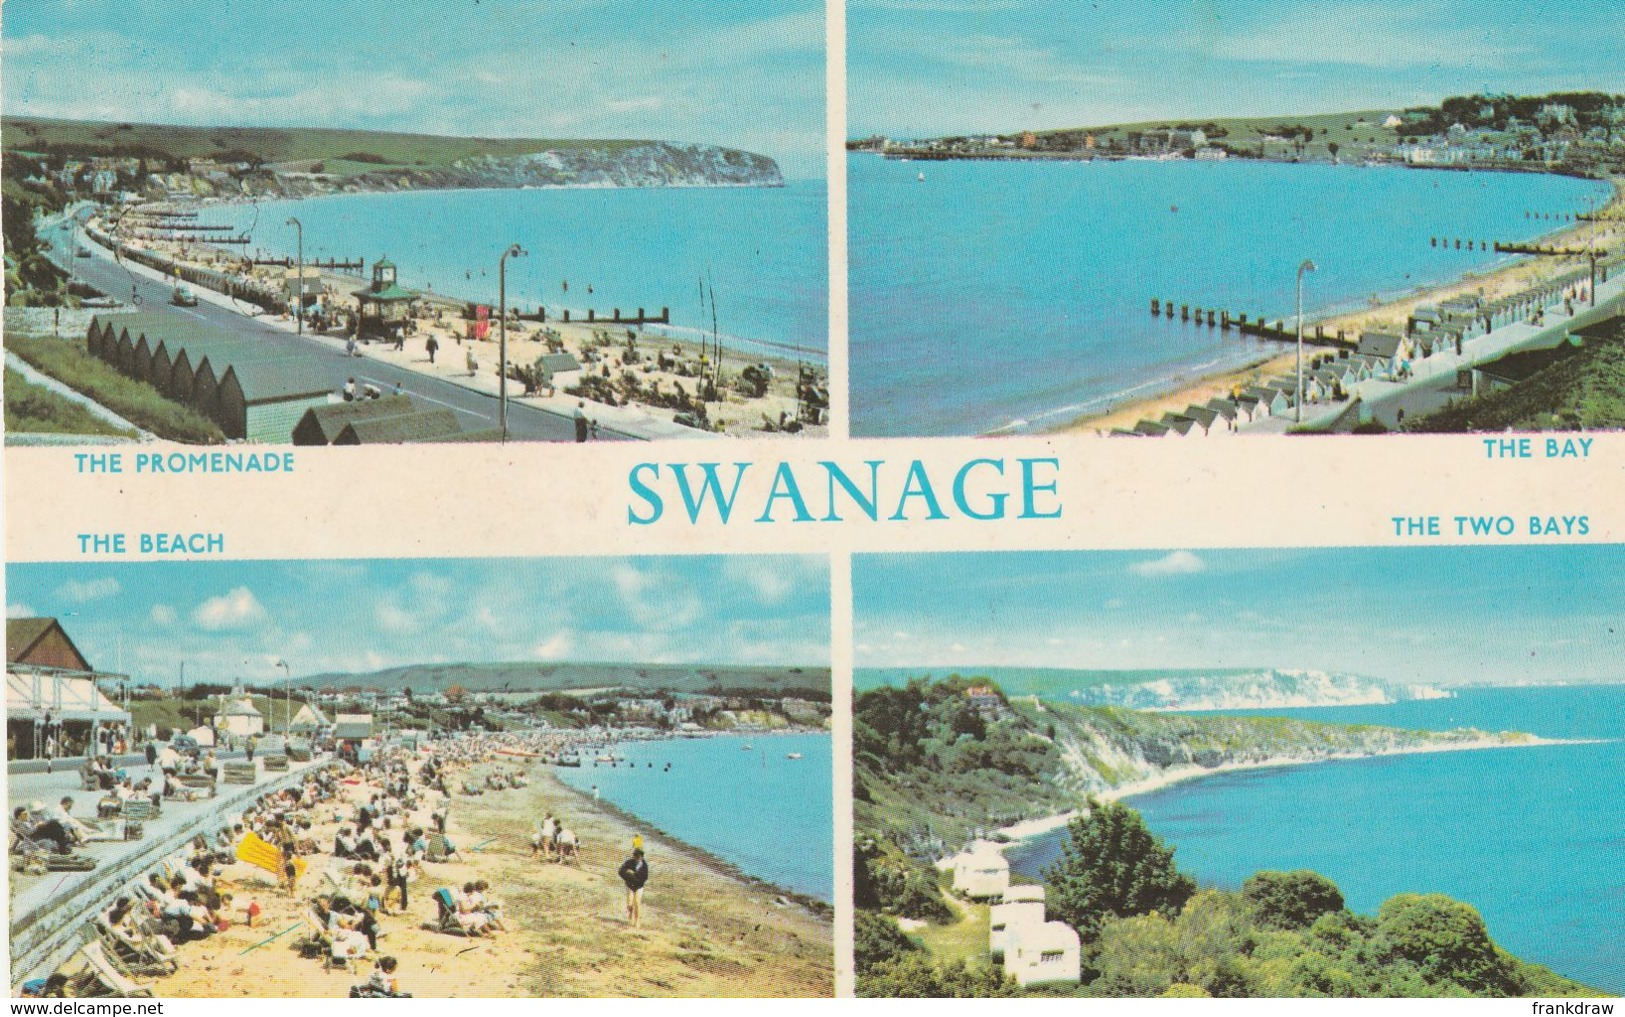 Postcard - Swanage Four Views  Card No.2122 Posted  13th Aug Looks Like 1970 Very Good - Swanage